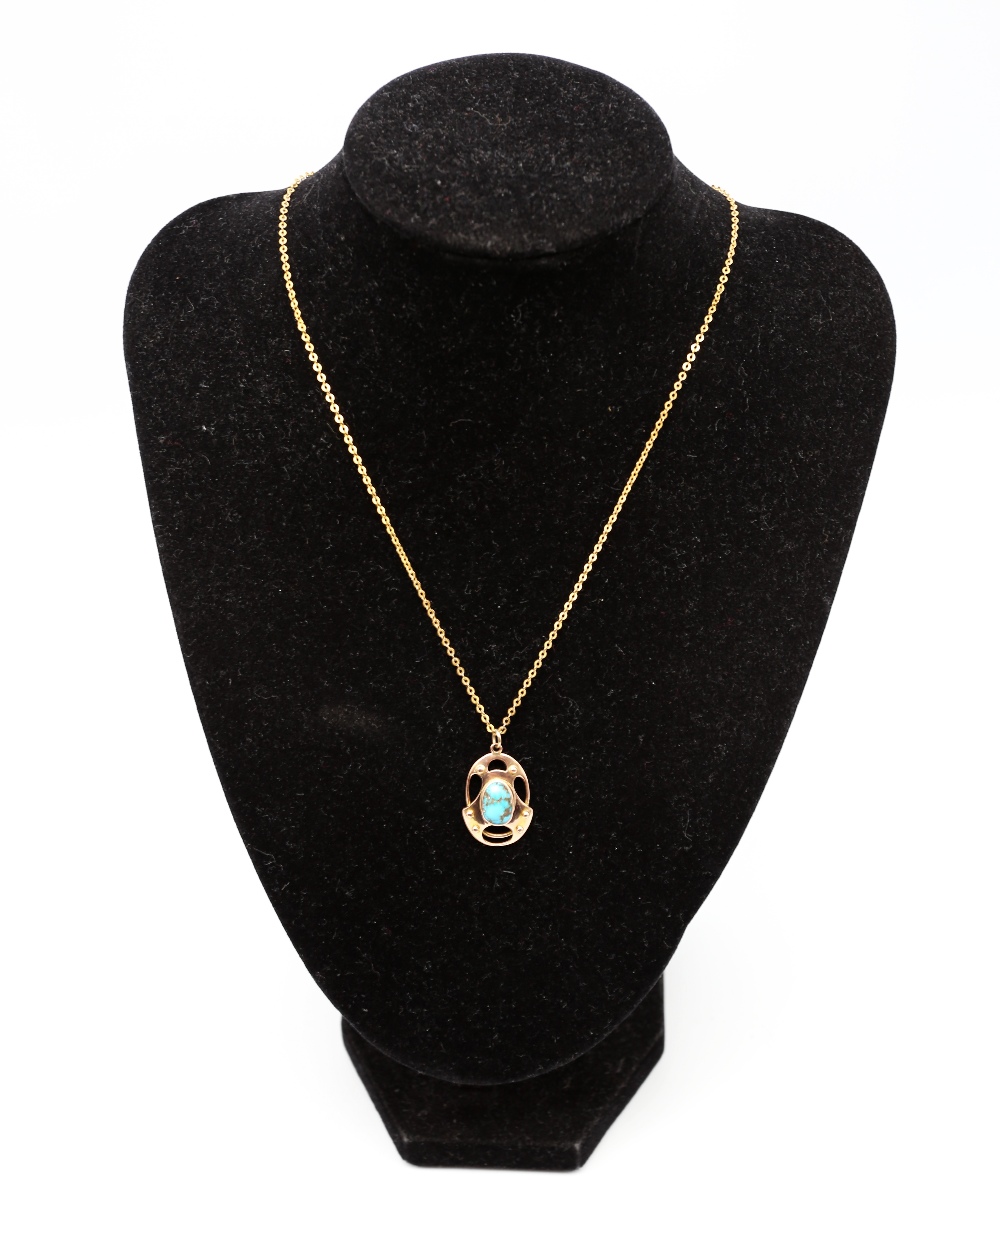 An early 20th century Liberty Style Jugendstil / Art Nouveau 9ct gold and turquoise pendant, with - Image 2 of 6